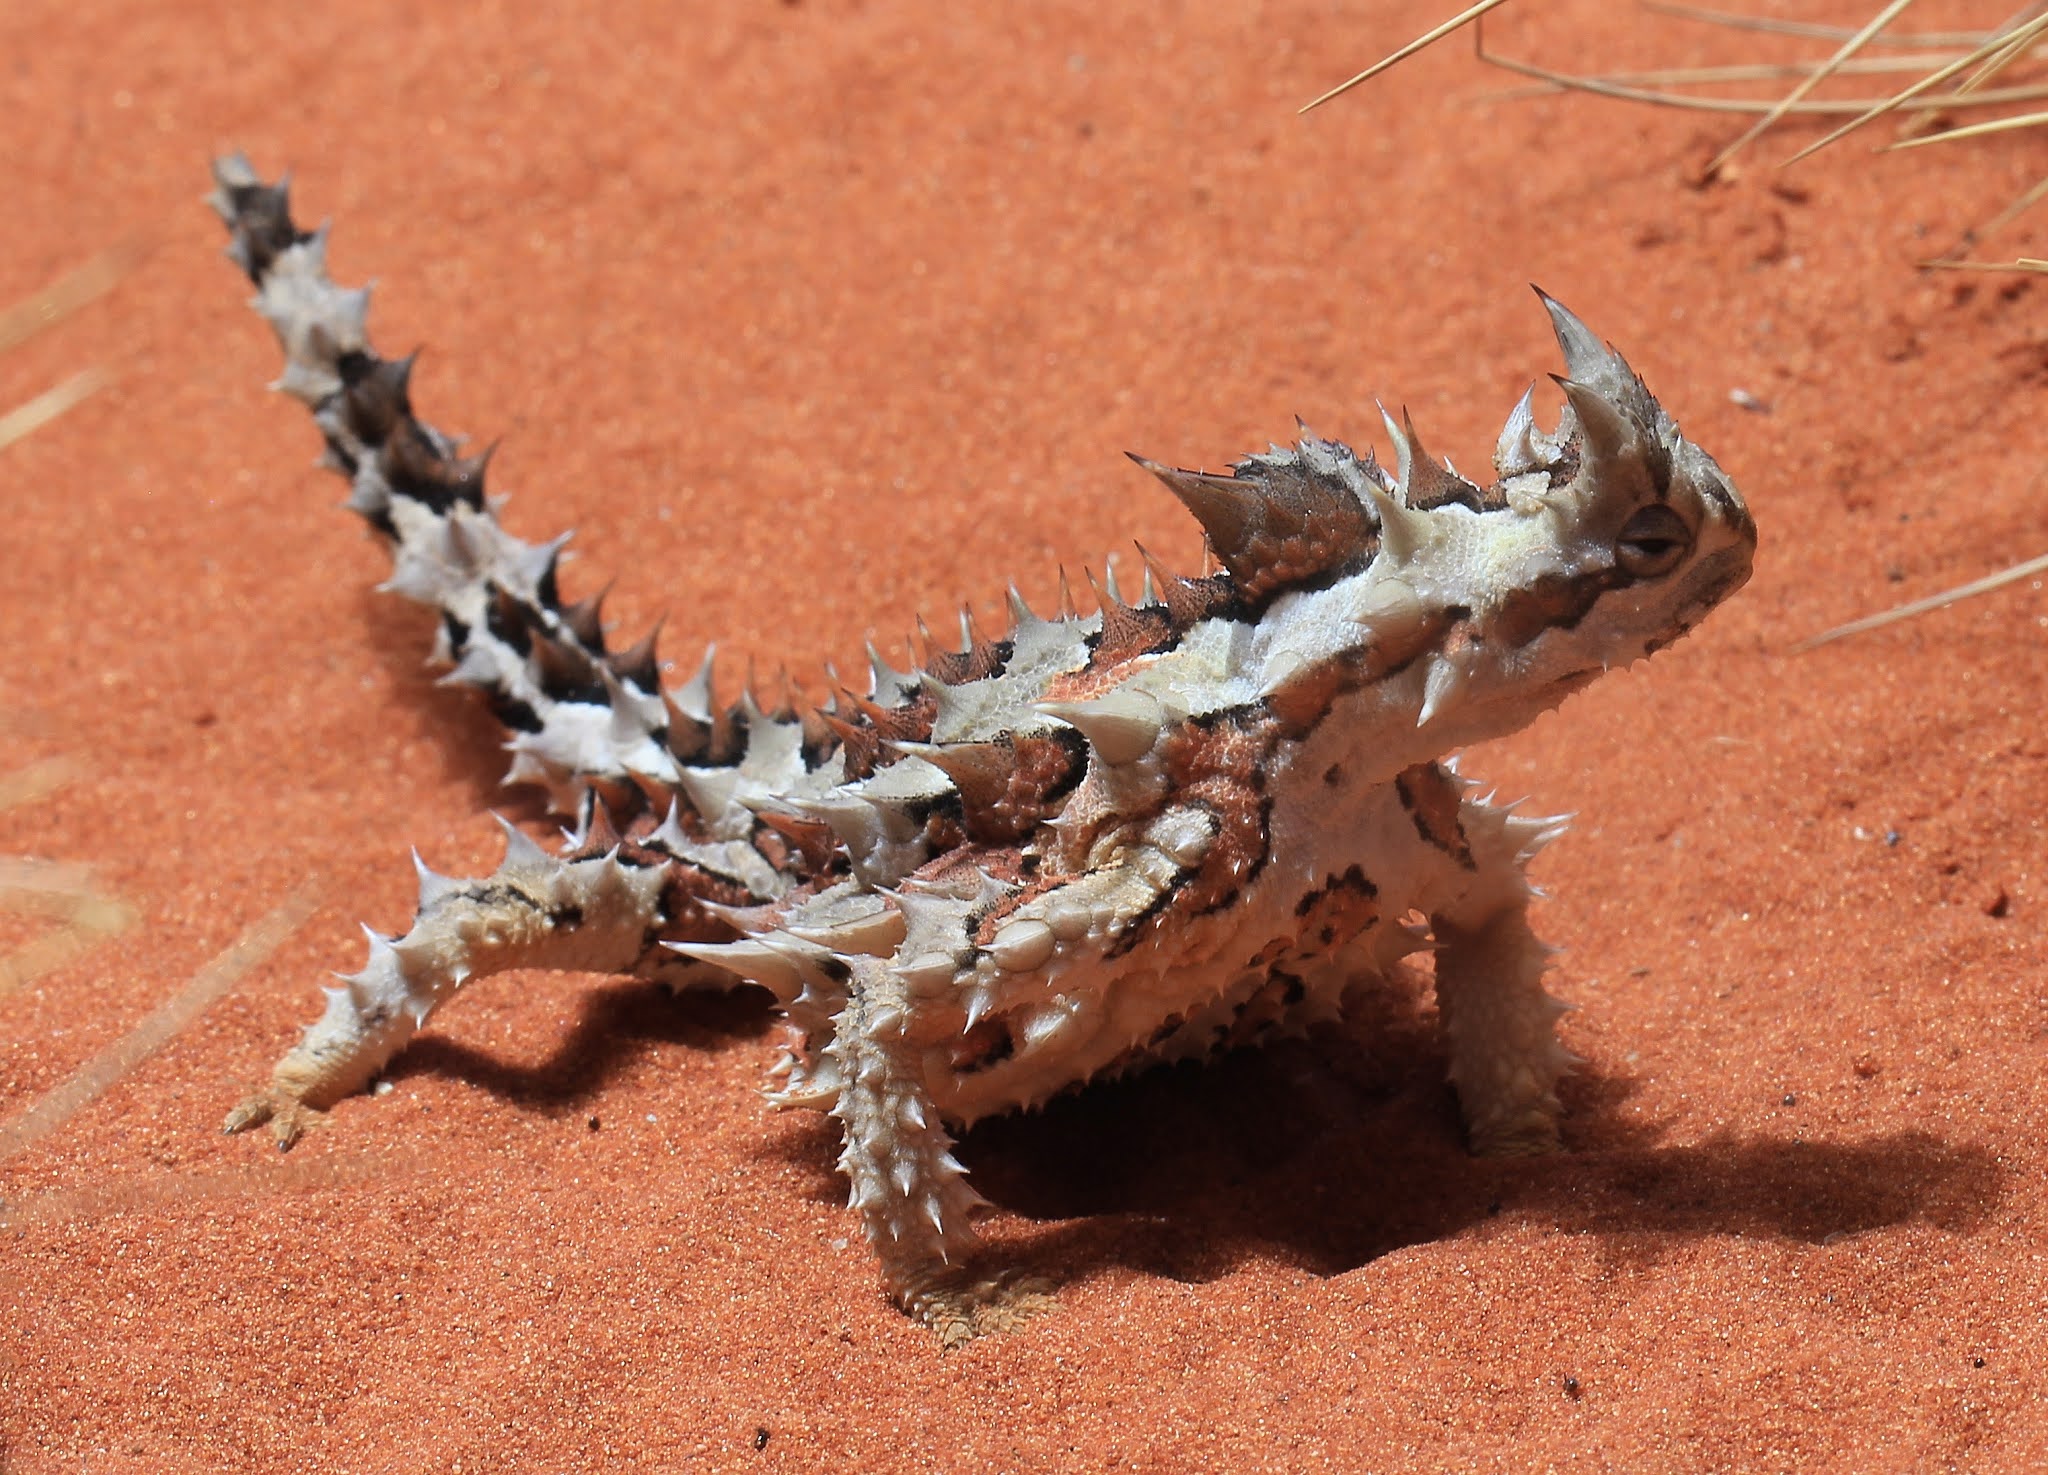 About Thorny Devil, Desert Monsters with Sharp Scales